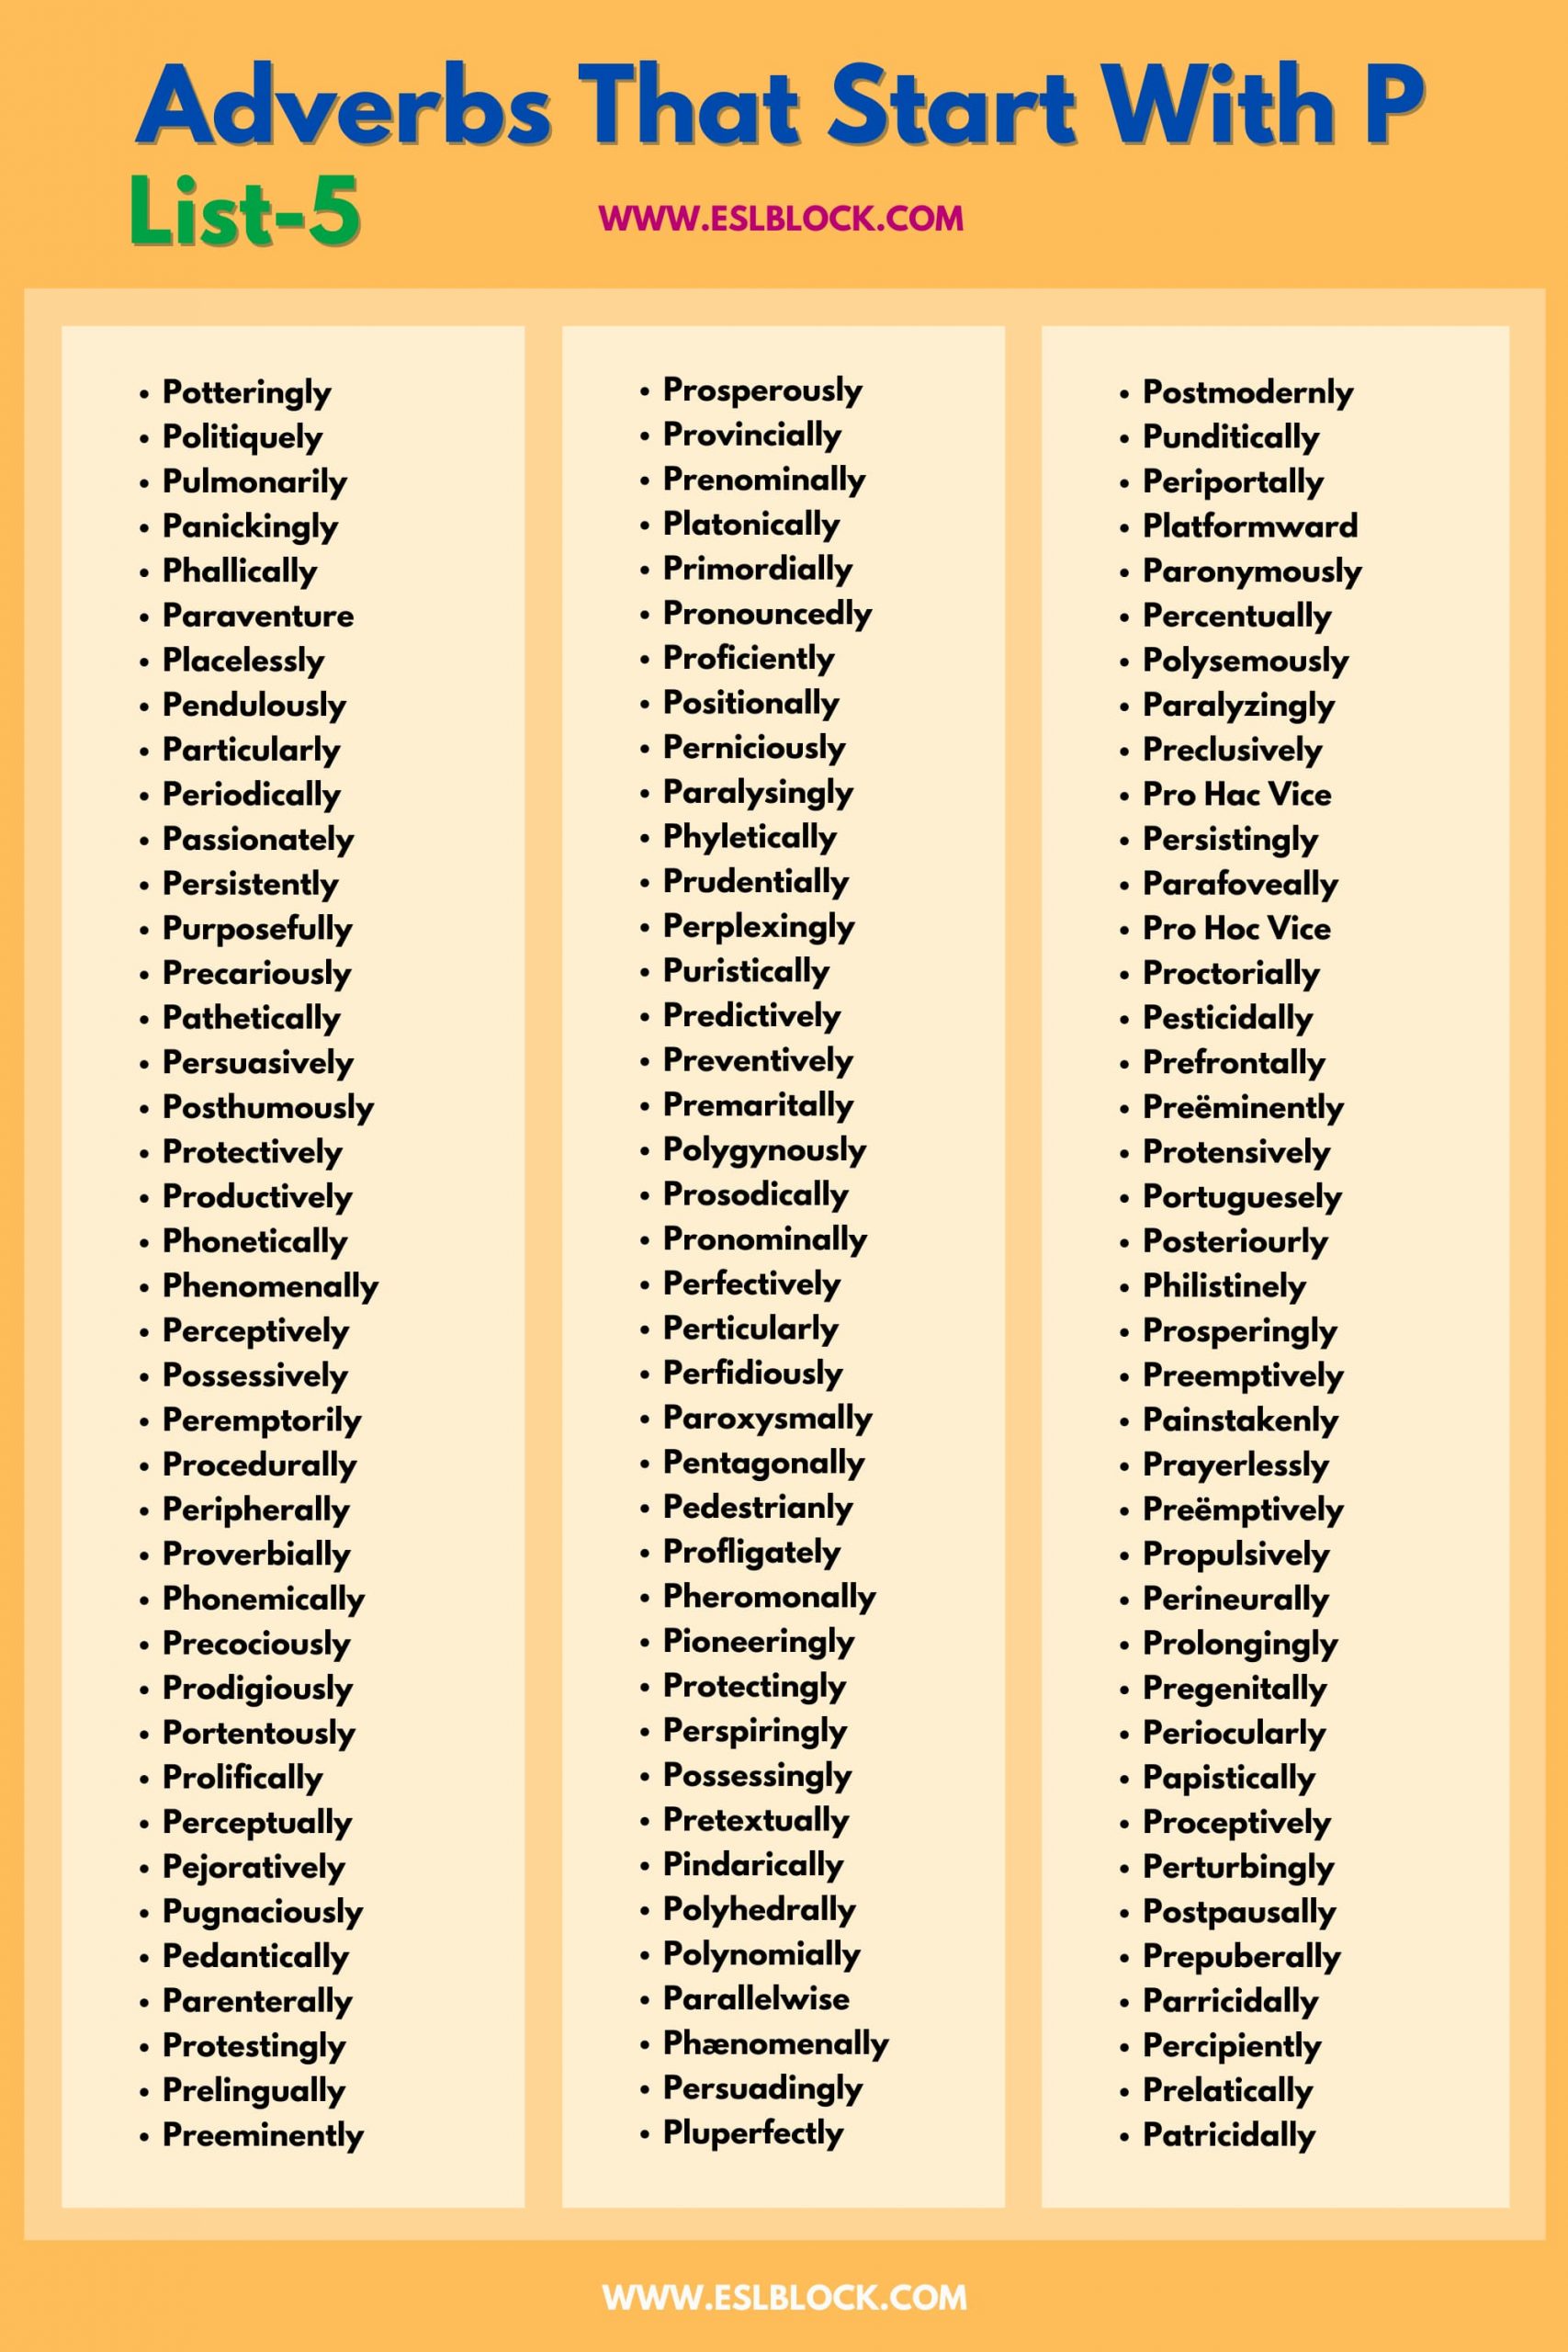 100 Example Sentences Using Adverbs, 4 Letter Adverbs That Start with P, 4 Letter Words, 5 Letter Adverbs That Start with P, 5 Letter Words, 6 Letter Adverbs That Start with P, 6 Letter Words, A to Z Adverbs, AA Adverbs, Adverb vocabulary words, Adverbs, Adverbs That Start with P, Adverbs with Example Sentences, All Adverbs, Types of Adverbs, Types of Adverbs with Example Sentences, Vocabulary, What are Adverbs, What are the types of Adverbs, Words That with P